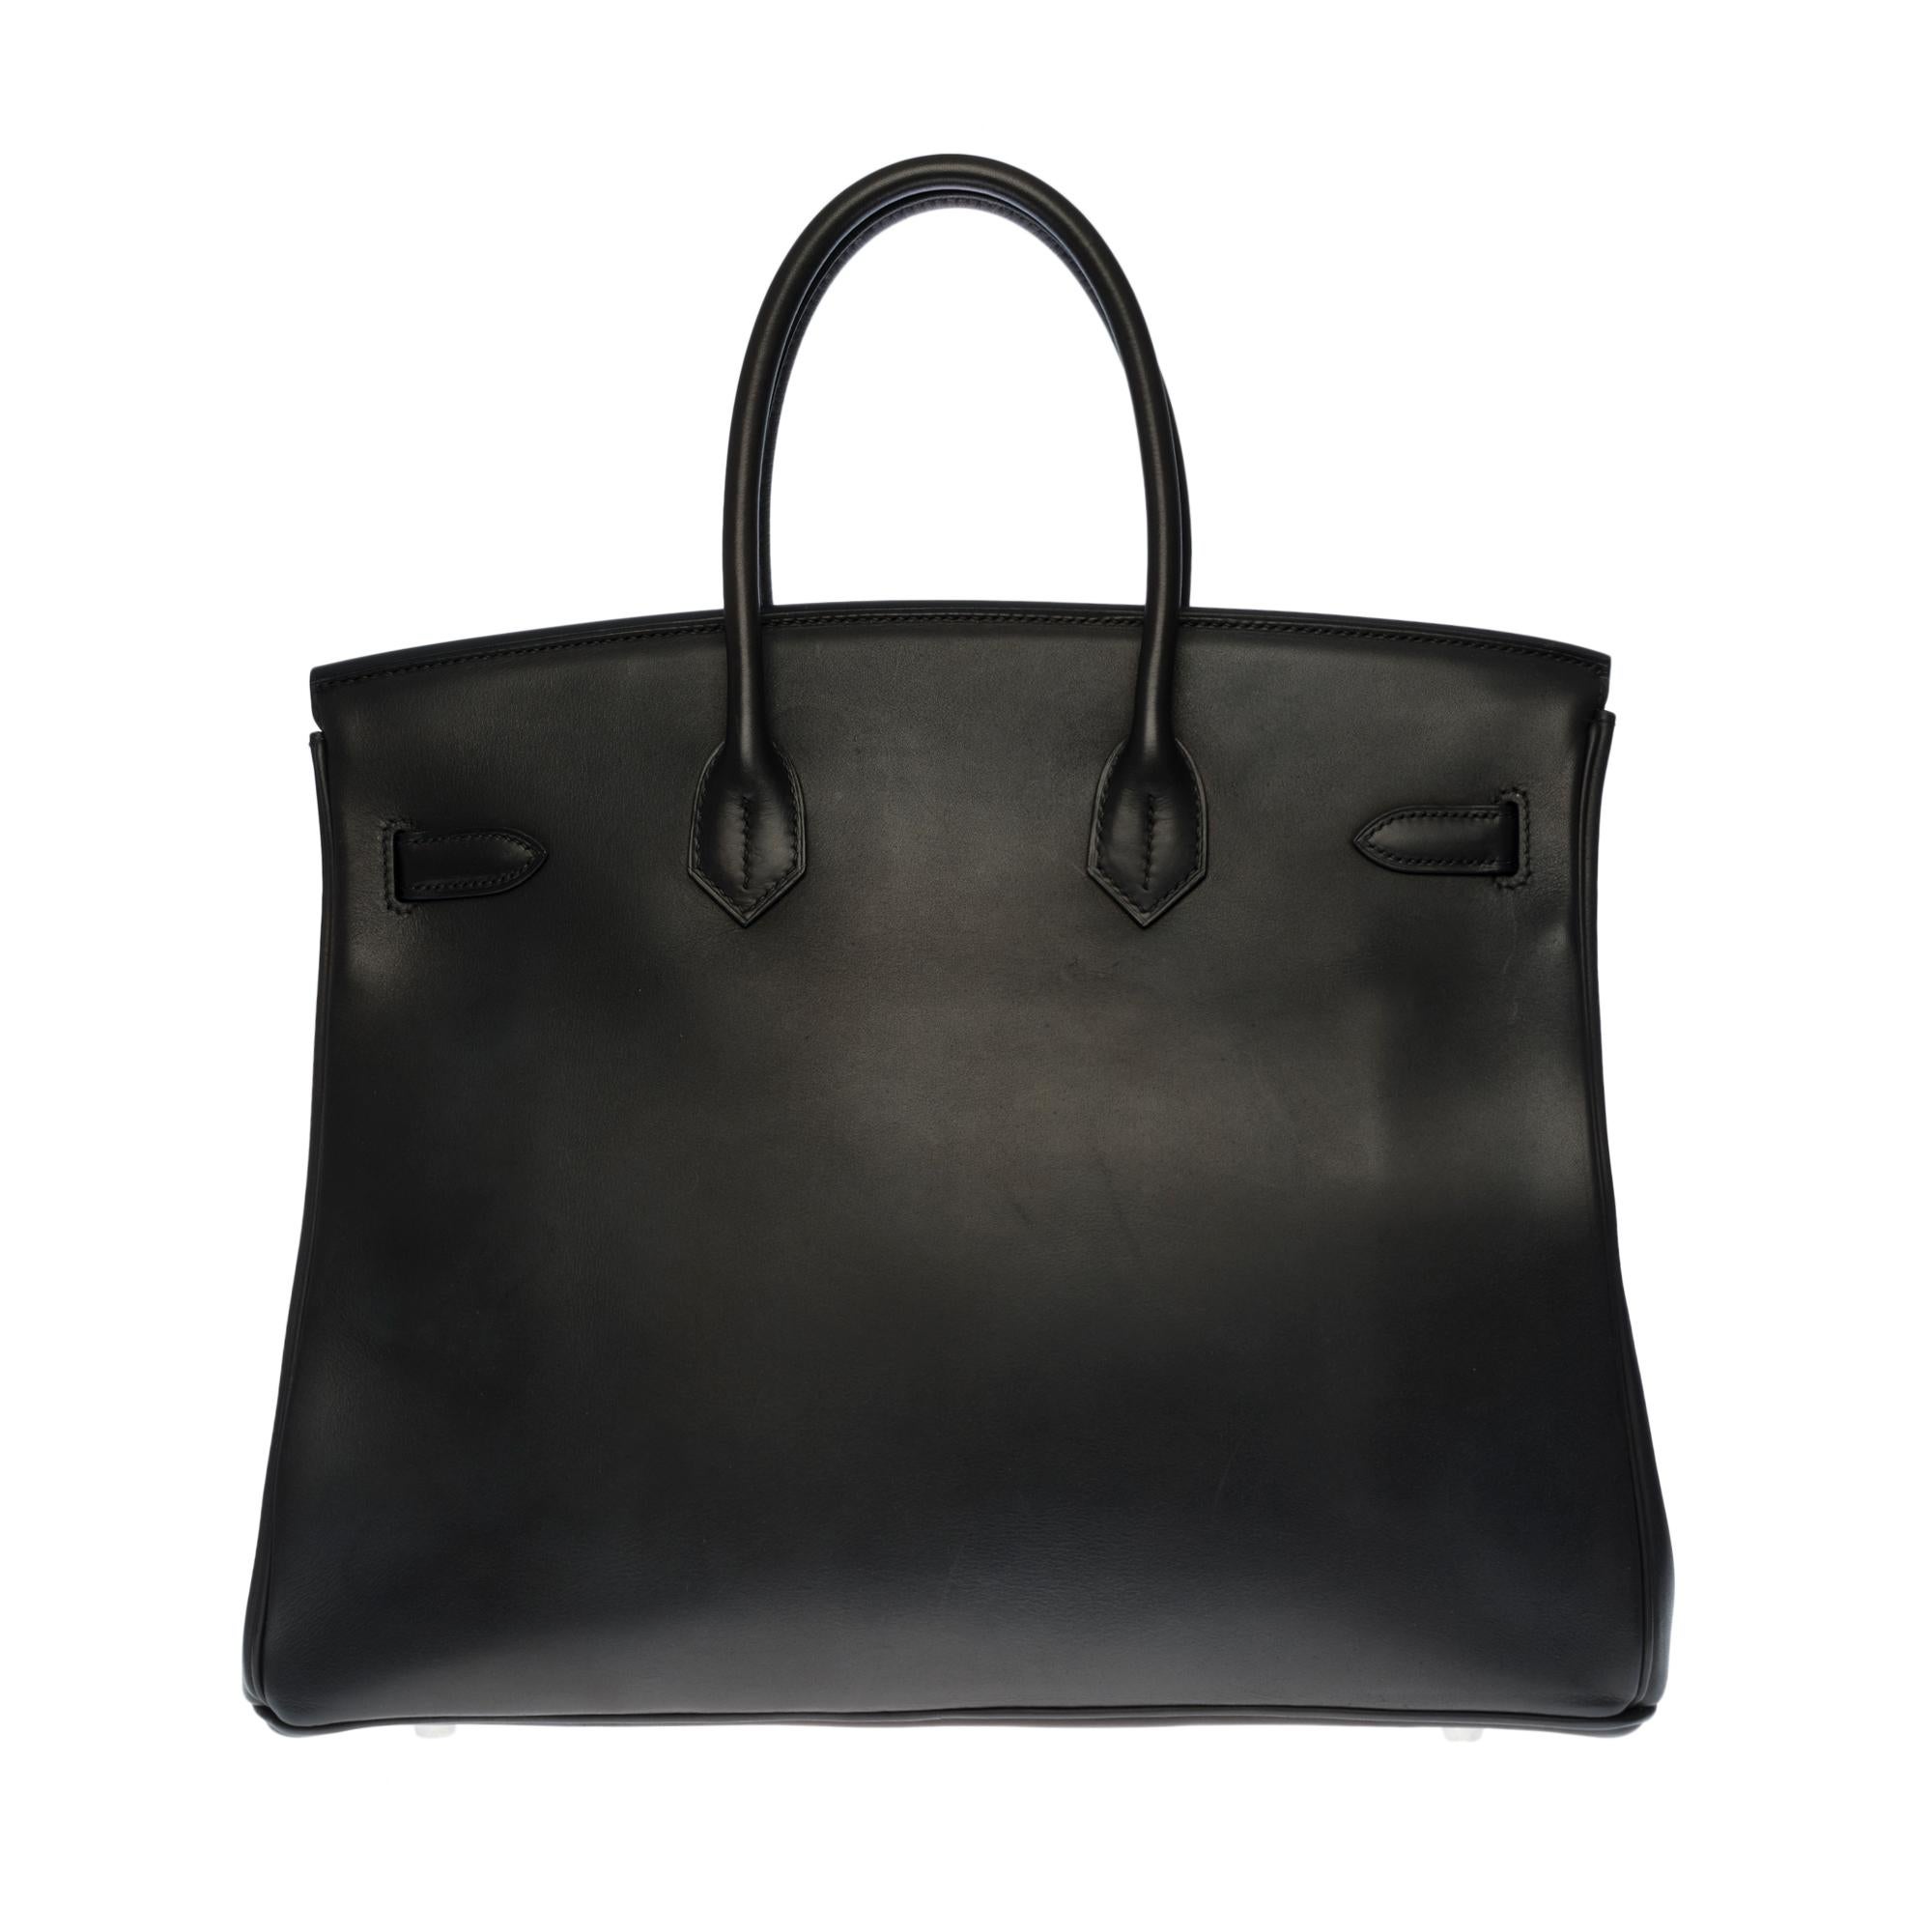 Rare & Exceptional Hermes Birkin 35 cm handbag in Barenia Black leather, palladium silver metal hardware, double handle in black leather allowing a handstand
Flap closure
Black leather lining, one zip pocket, one patch pocket
Signature: 